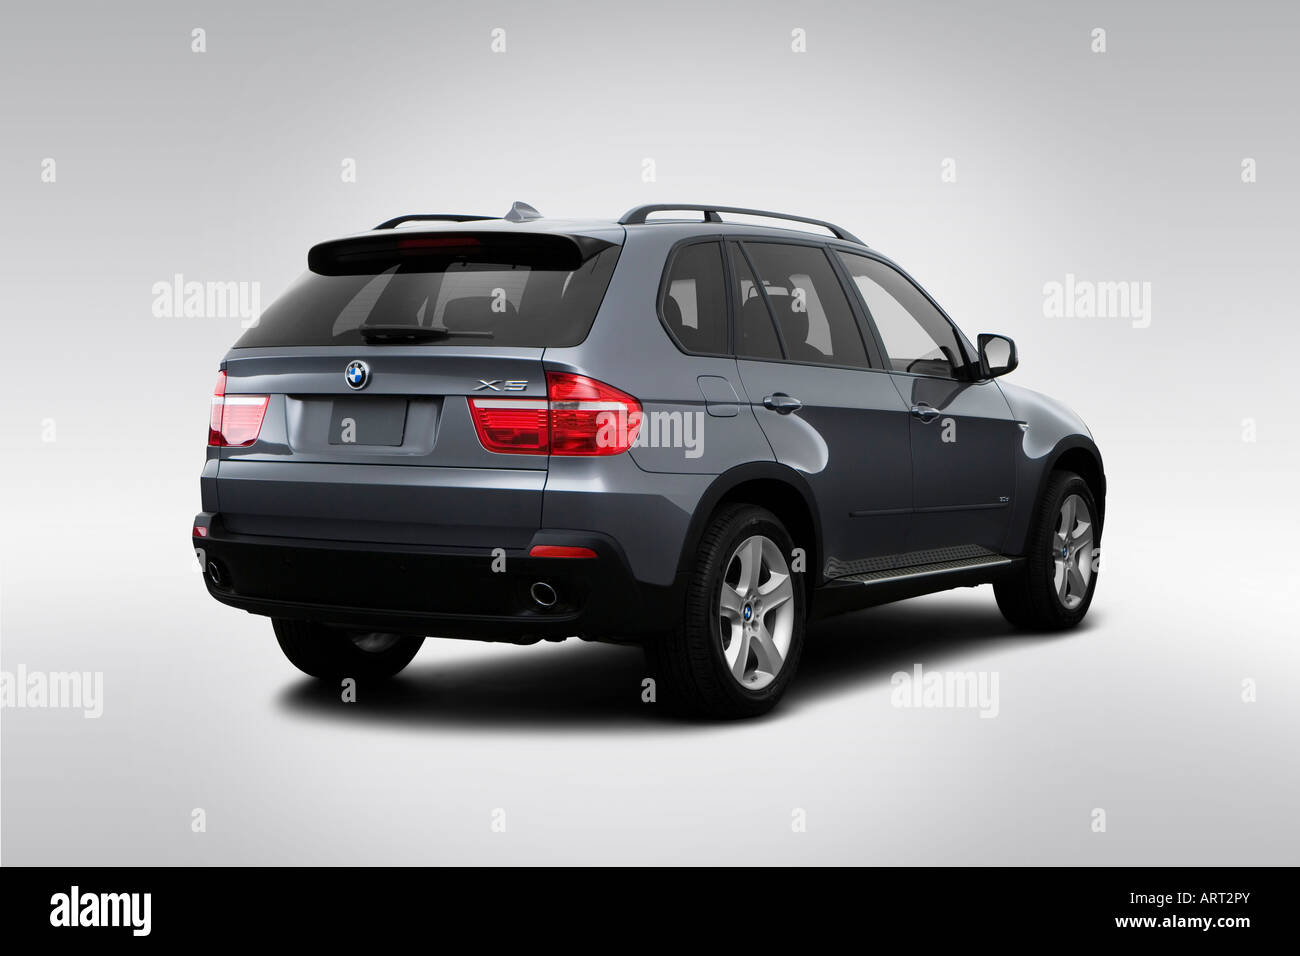 2008 BMW X5 Prices Reviews  Pictures  CarGurus